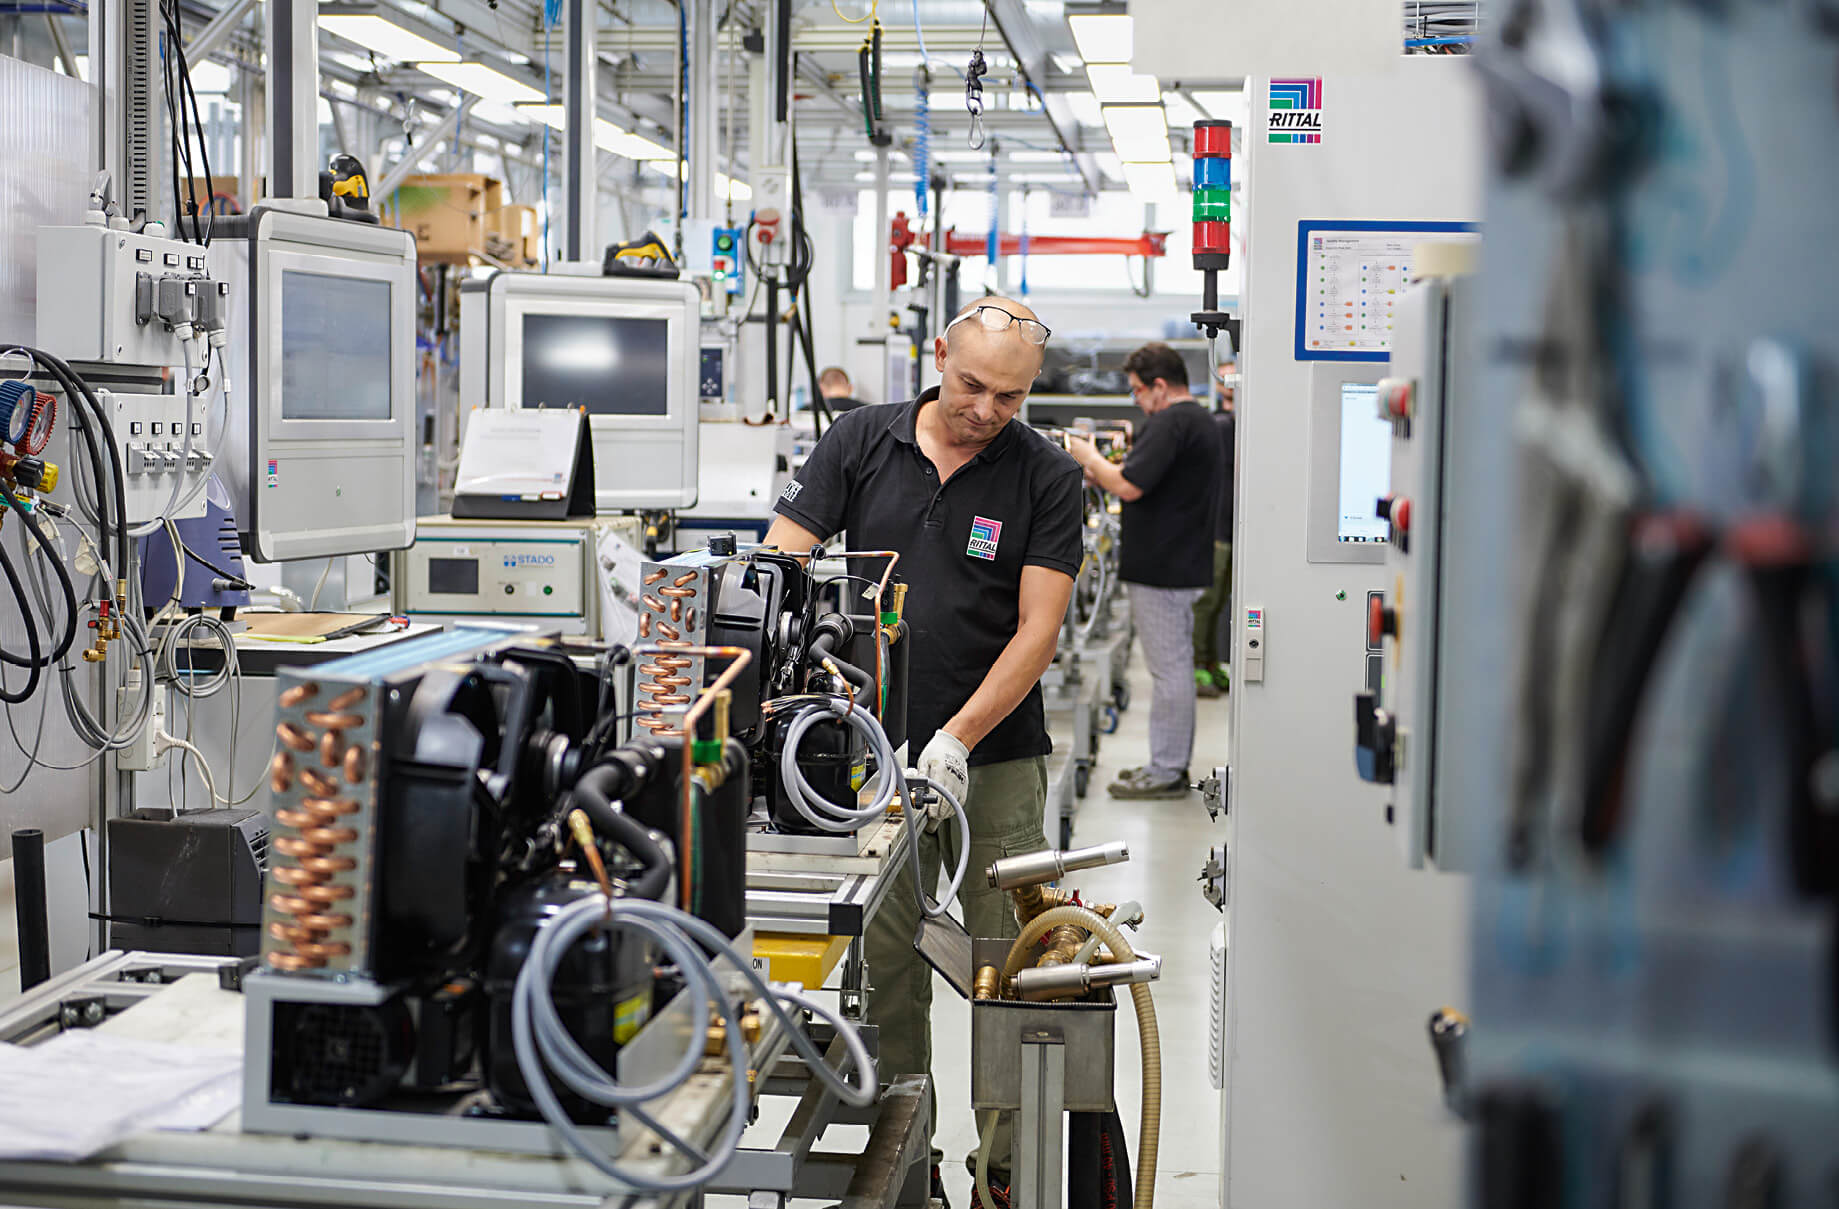 At Valeggio sul Mincio in Italy, Rittal manufactures efficient cooling solutions for industrial use that cut energy consumption and CO2 emissions by 75 per cent on average.